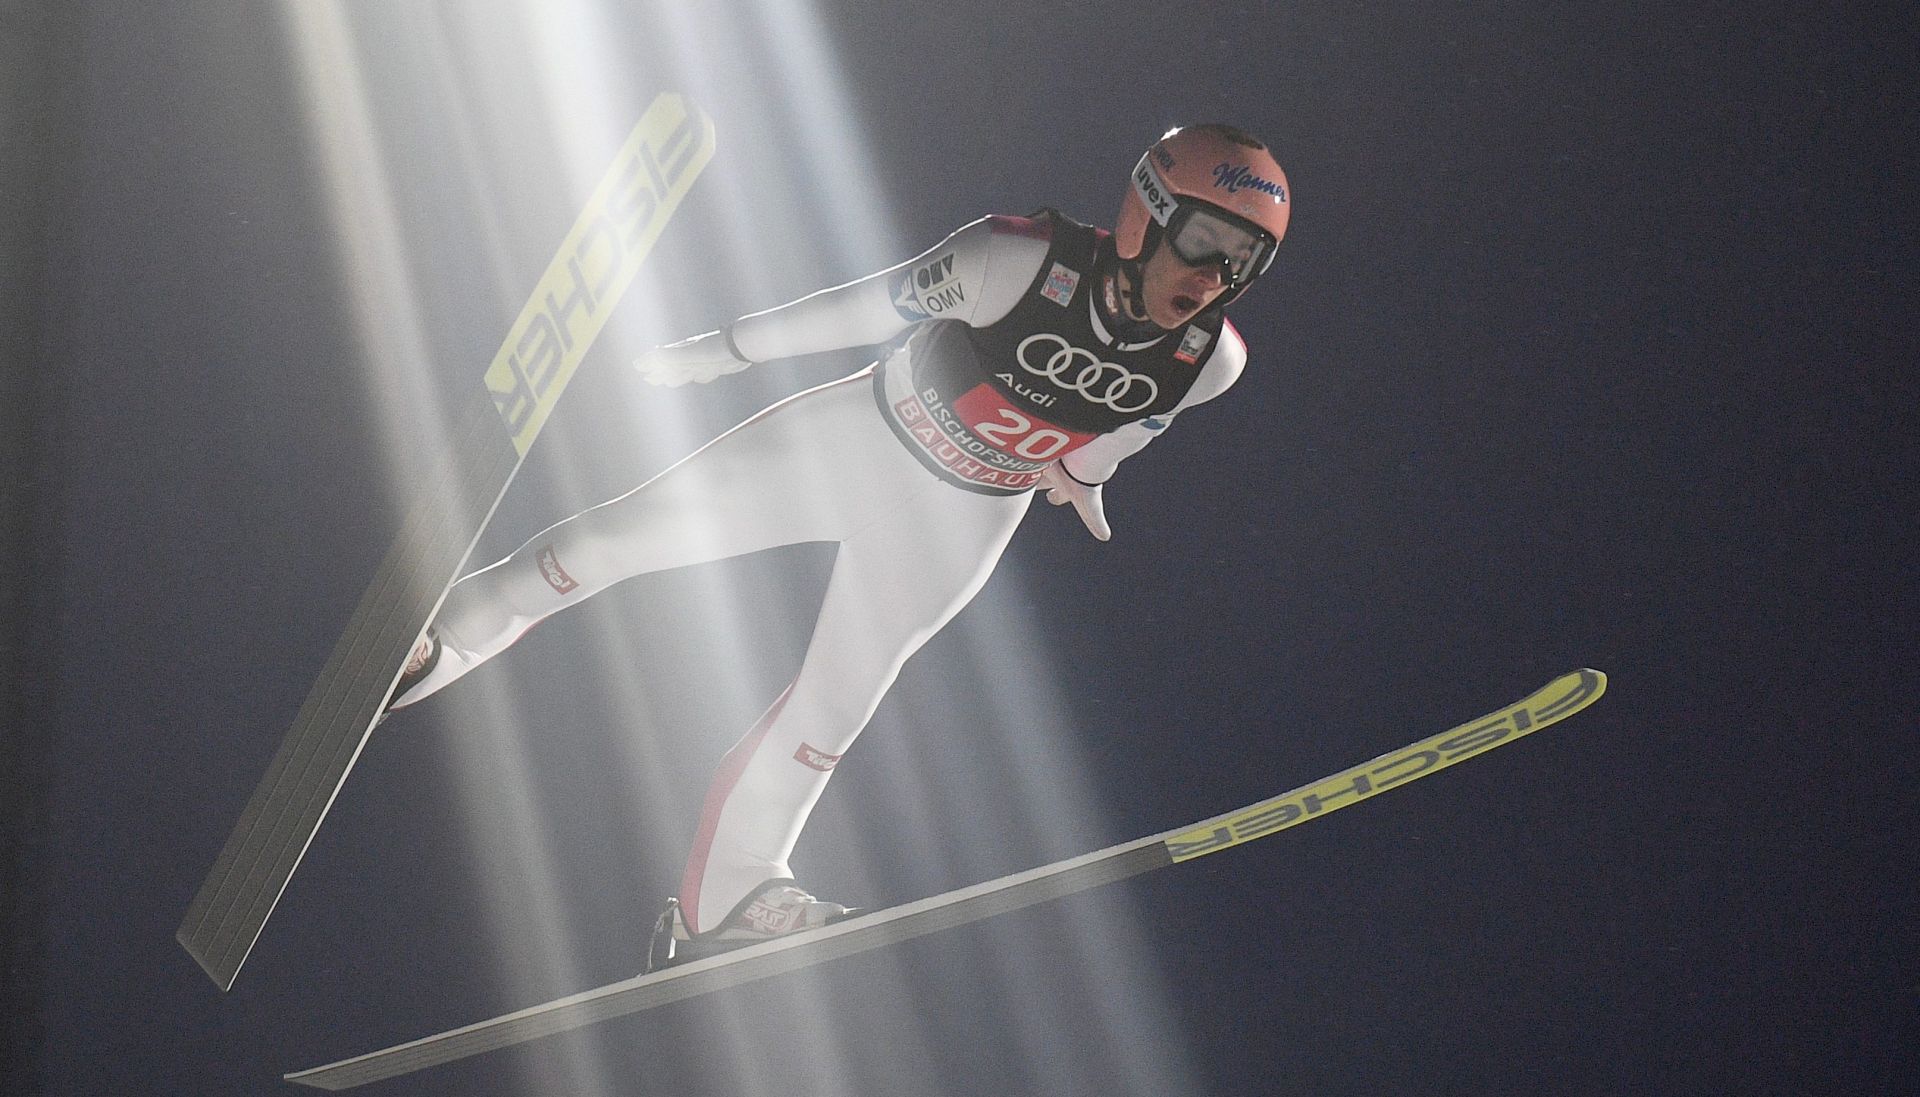 epa05701725 Stefan Kraft of Austria is airborne during the fourth stage of the 65th Four Hills Ski Jumping Tournament on the Paul Ausserleitner Hill in Bischofshofen, Austria, 06 January 2017.  EPA/CHRISTIAN BRUNA